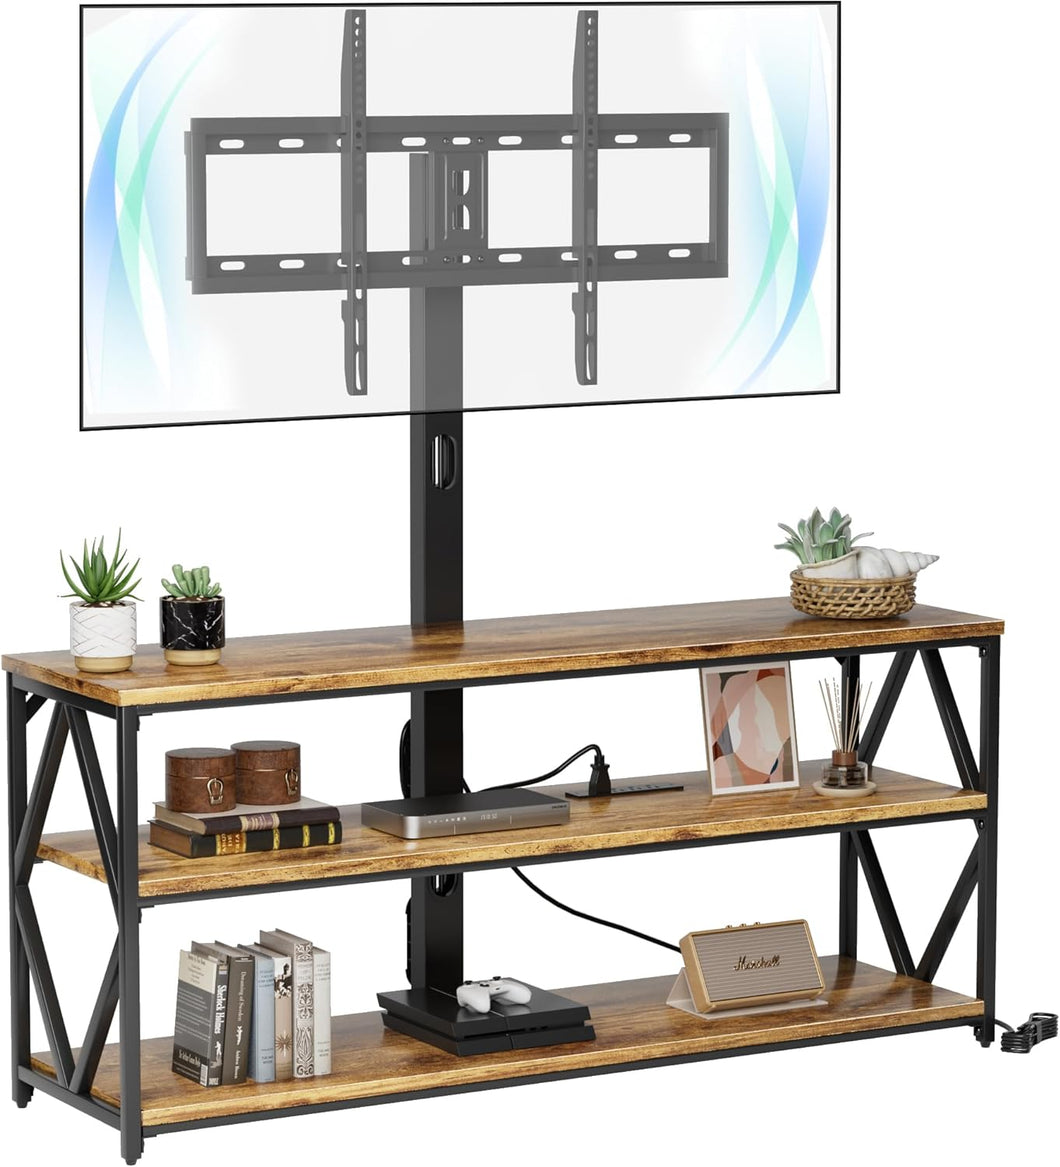 TV Stand with Mount and Power Outlet, Universal Height Adjustable Swivel TV Stand Mount for Up to 75 Inch TVs, Entertainment Center with Storage Shelves for Living Room, Rustic Brown